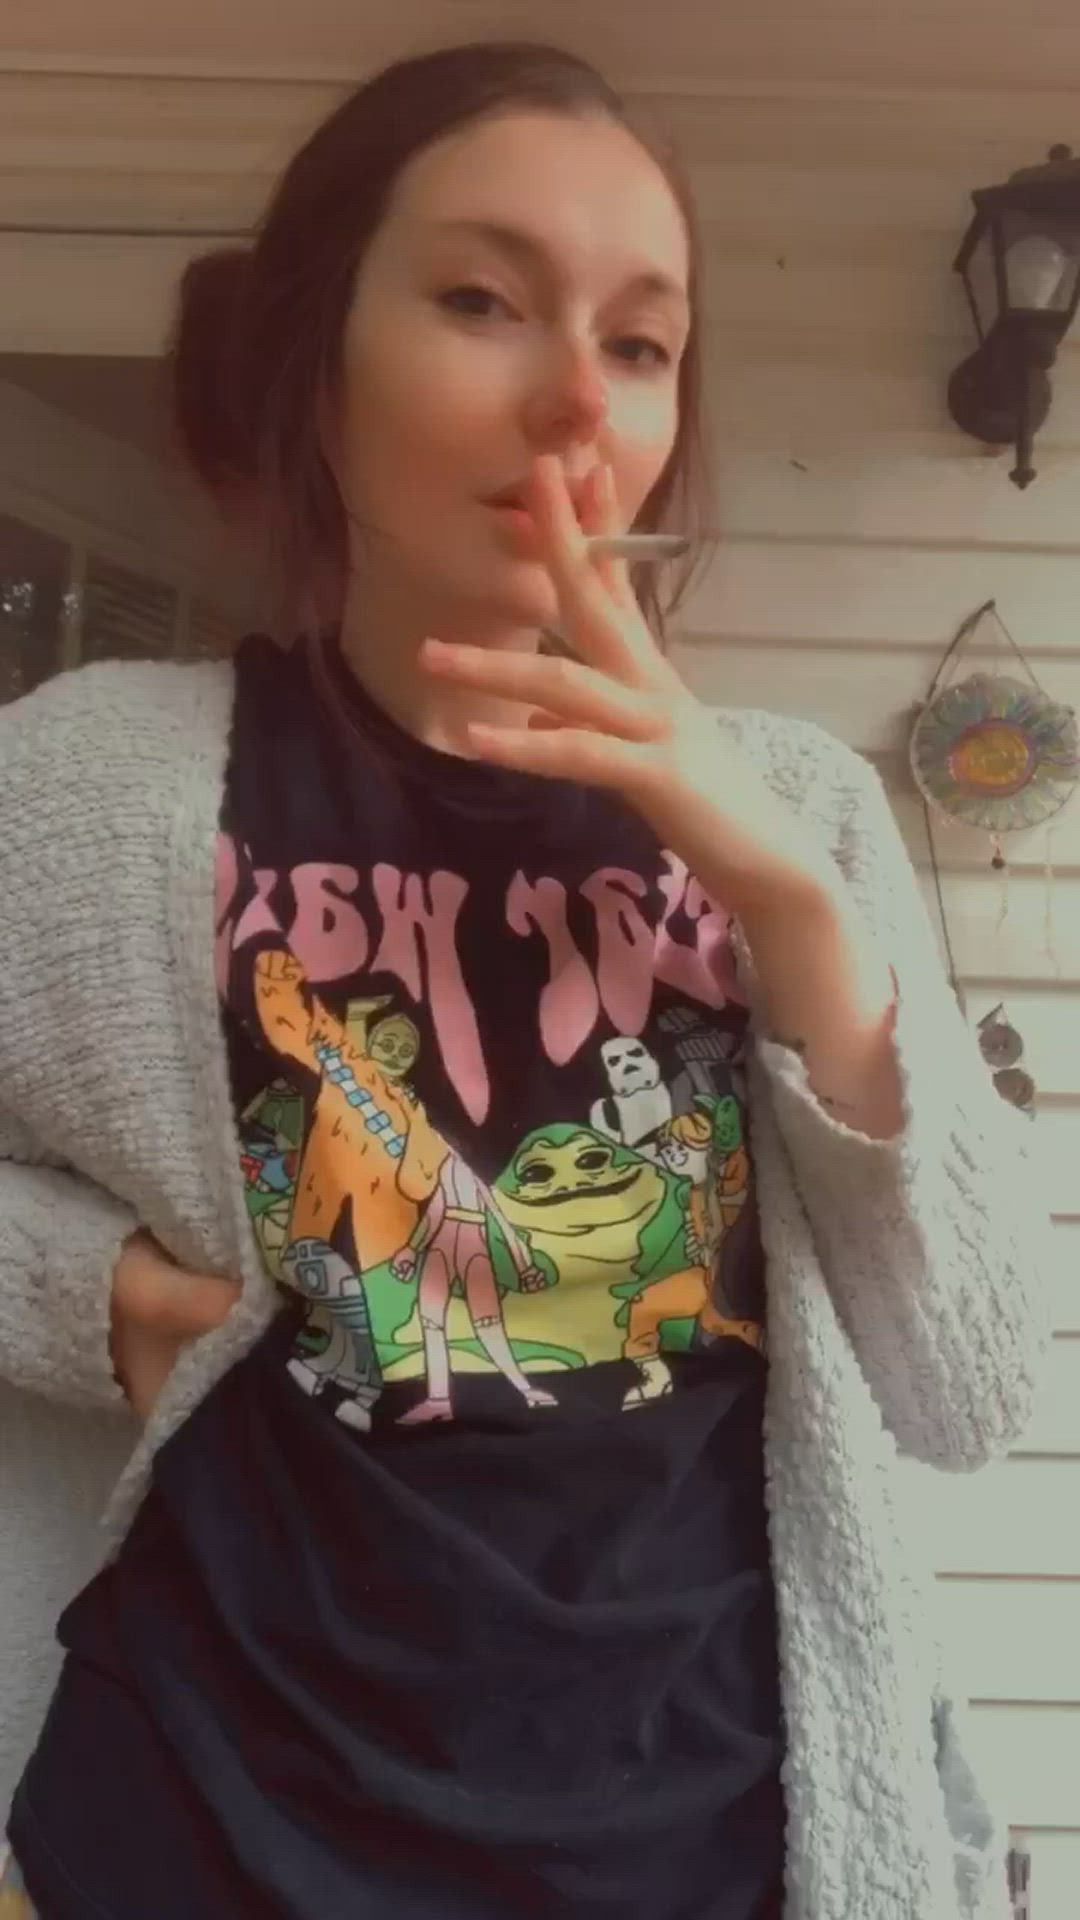 Smoking porn video with onlyfans model abigailrose444 <strong>@abbylane333</strong>